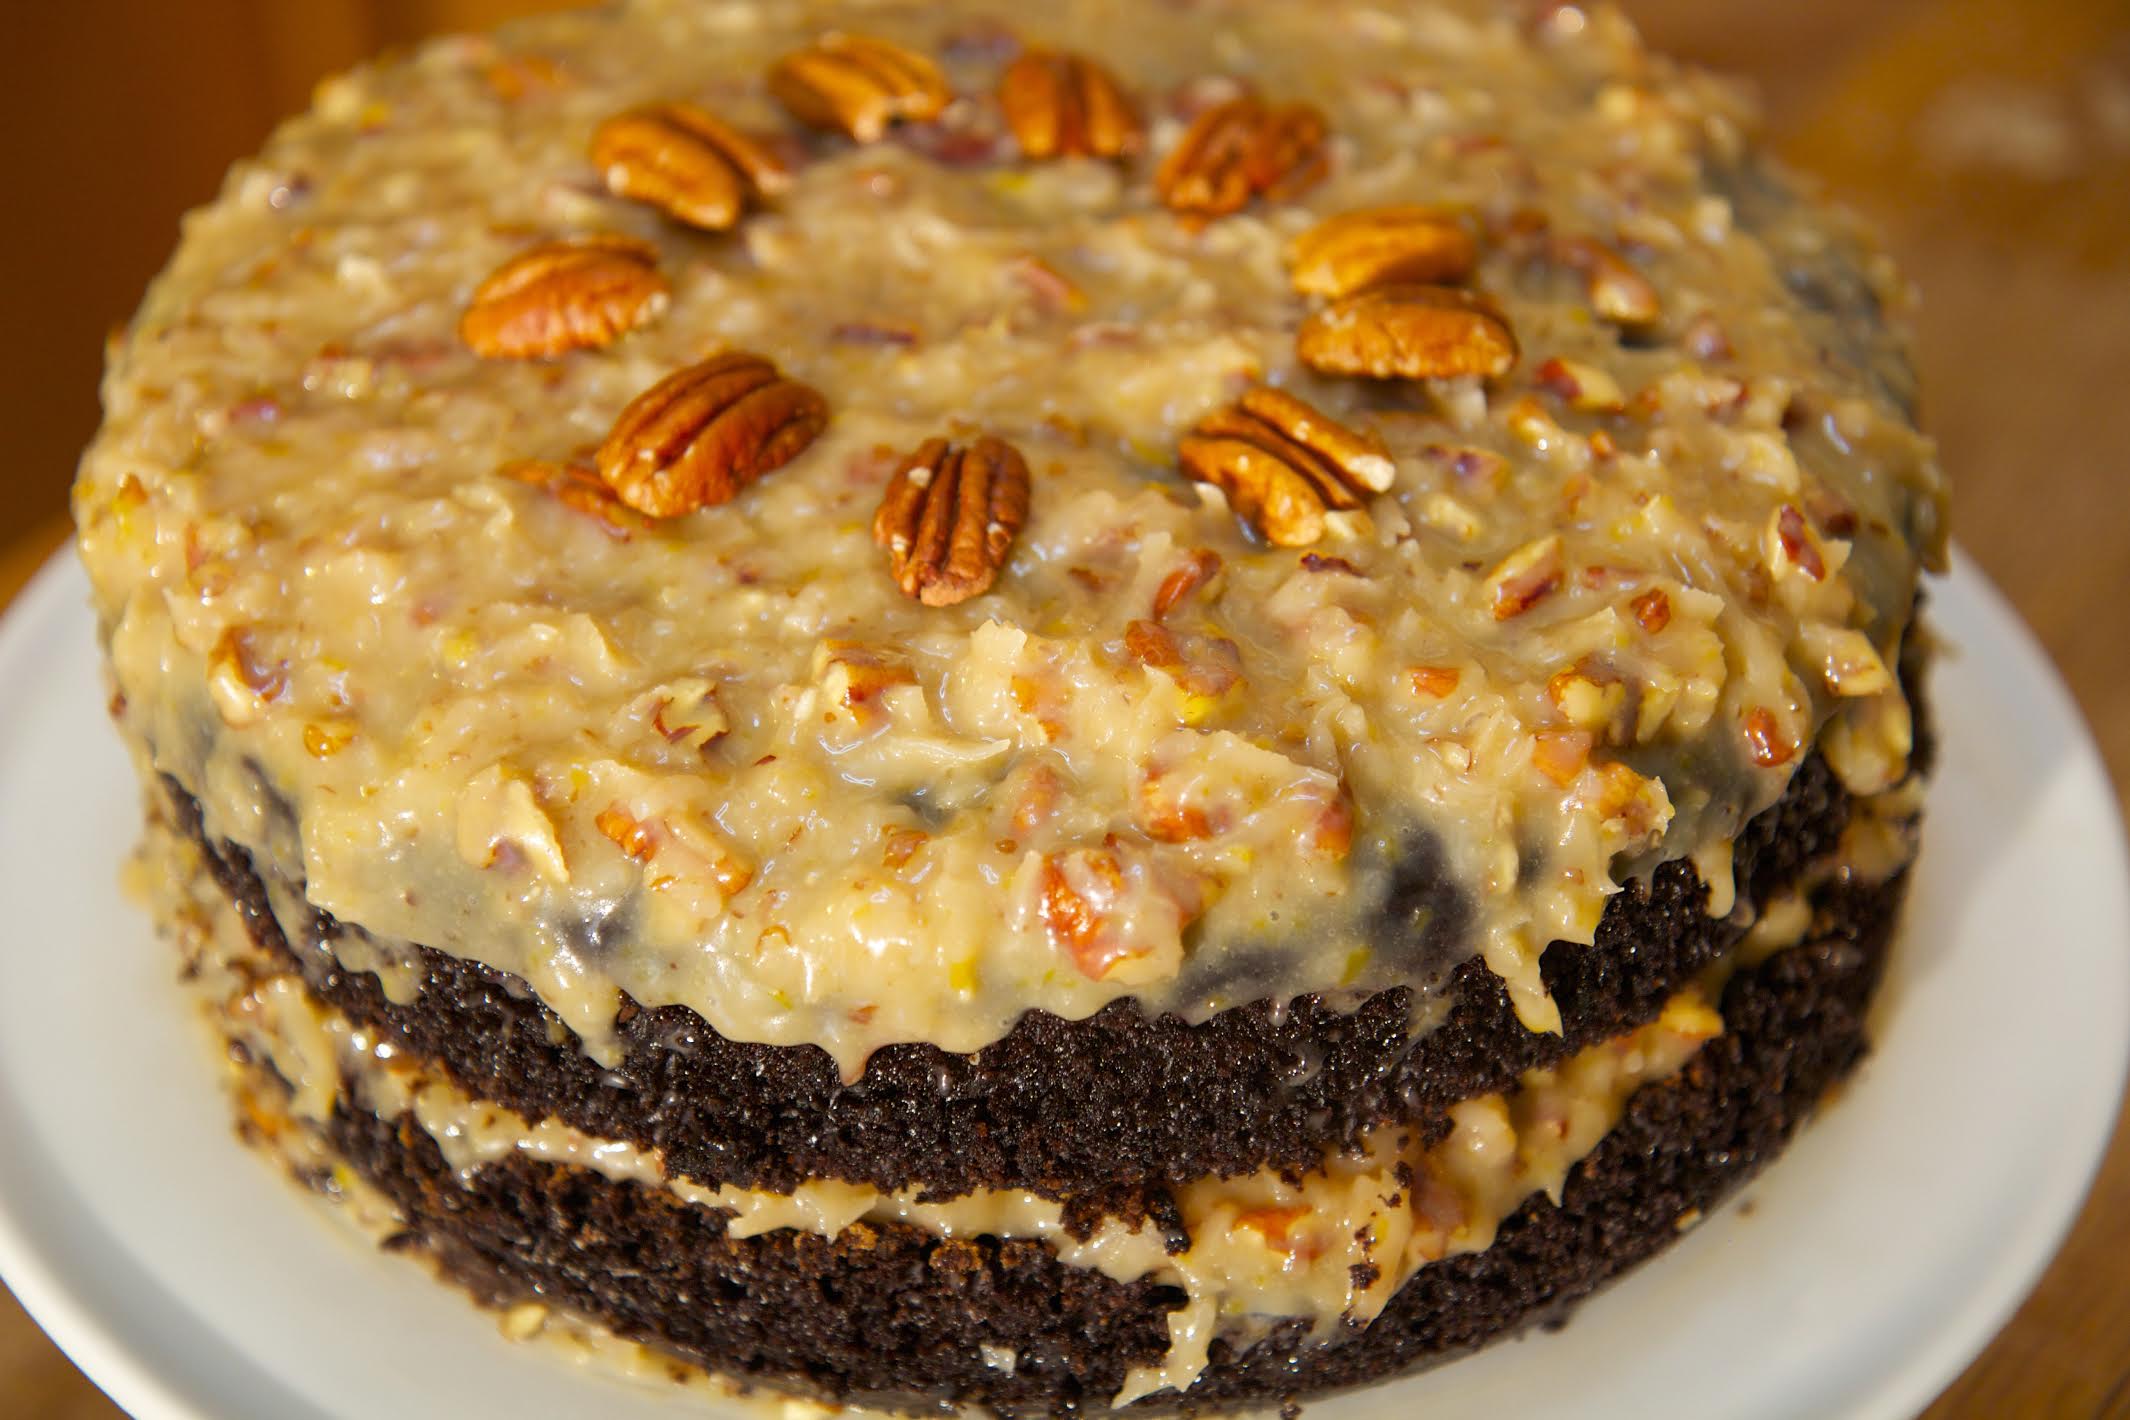 This decadent german chocolate cake is sweet, moist, and packed with flavor. If you're looking for the best german chocolate cake recipe - this is it!